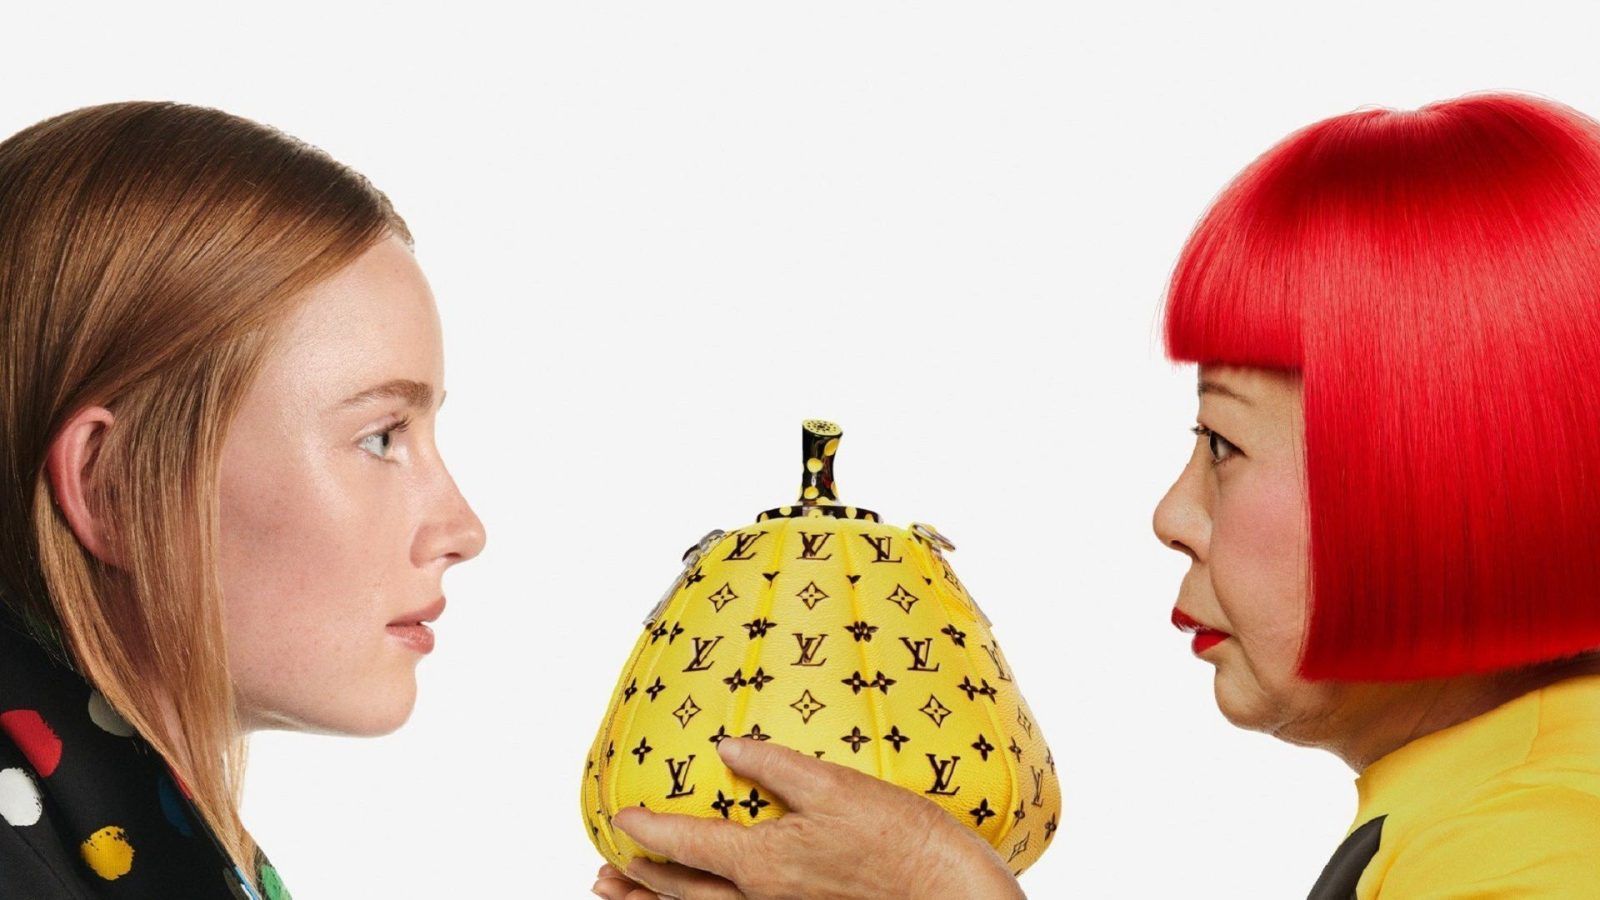 Louis Vuitton and Yayoi Kusama are collaborating again!